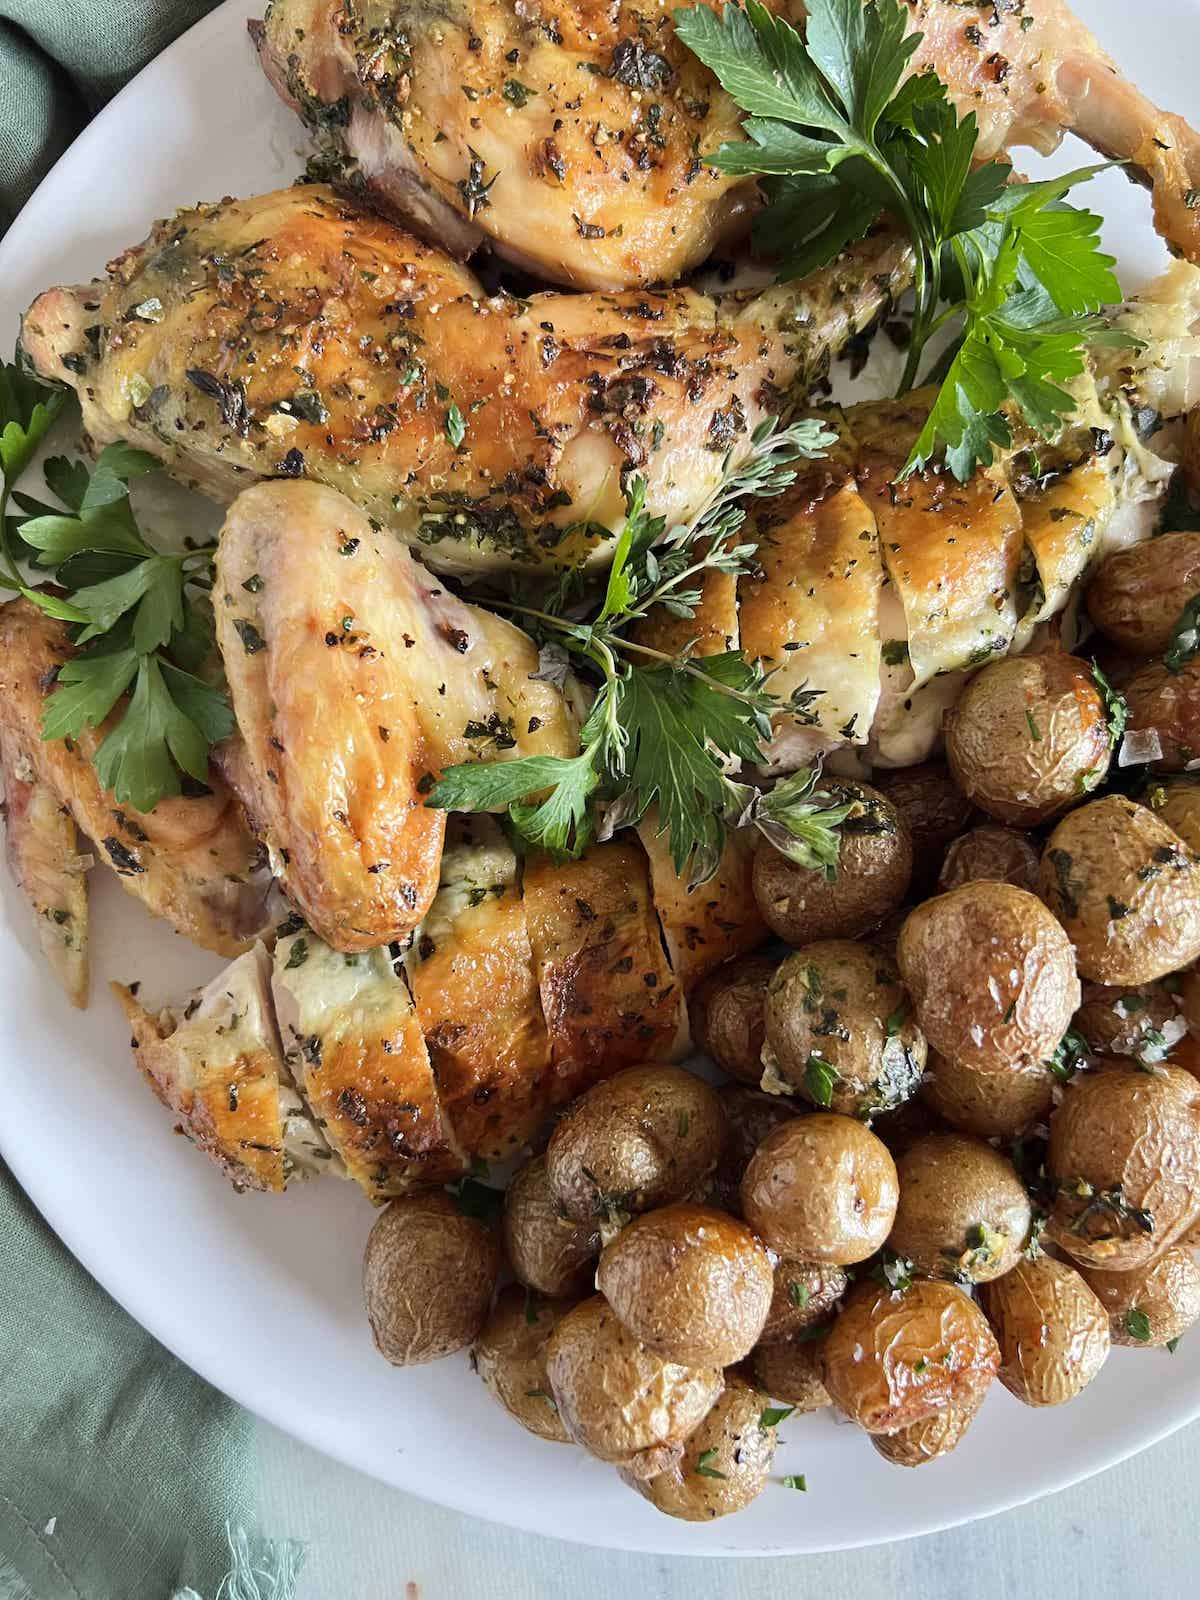 Carved roast chicken with baby potatoes on a white platter with herbs.